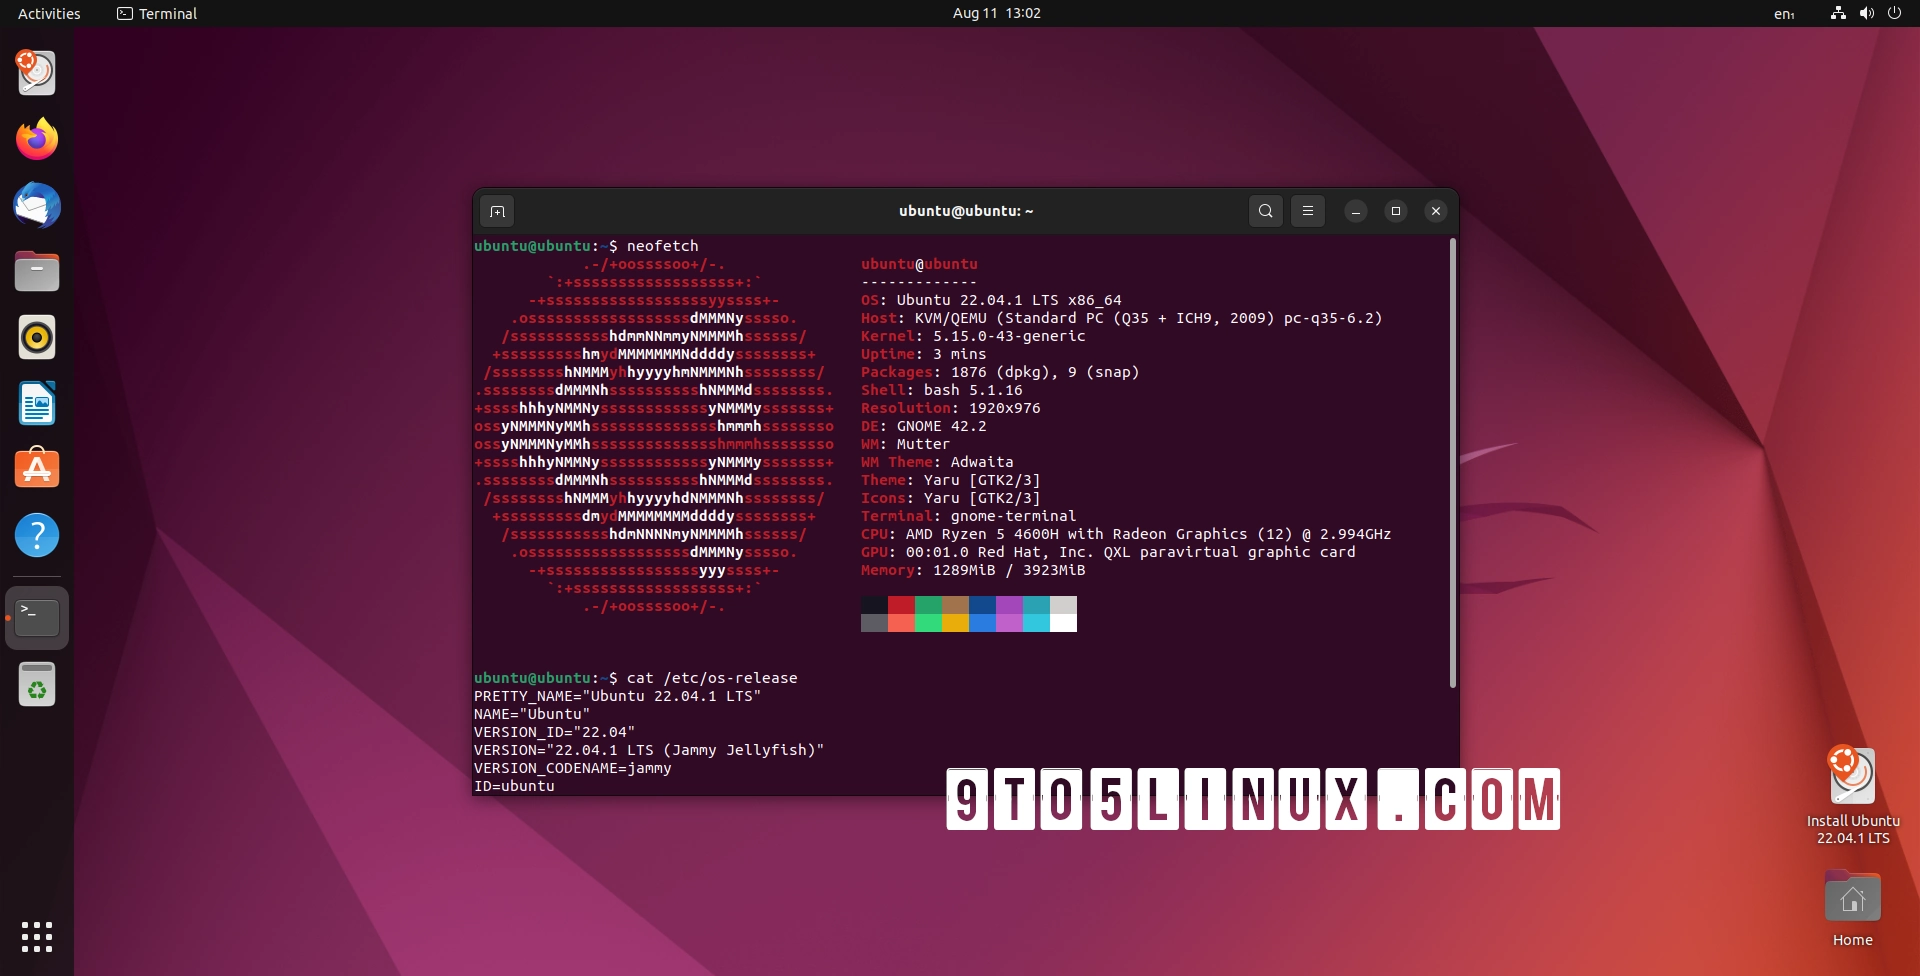 Ubuntu 22.04.1 LTS (Jammy Jellyfish) Is Now Available for Download, This Is What’s New